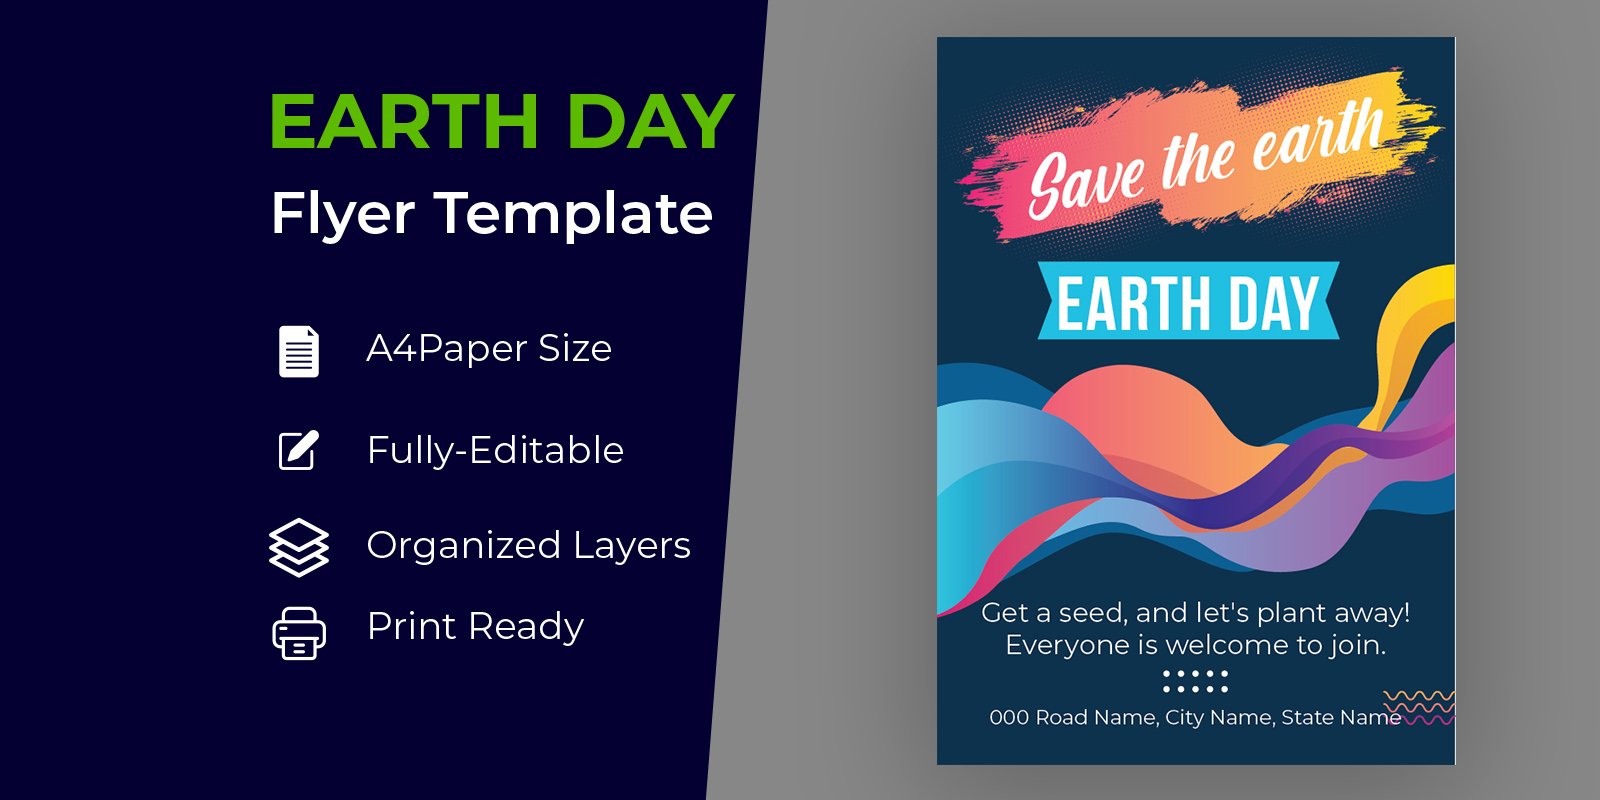 International Earth Day Flyer Design Corporate identity template